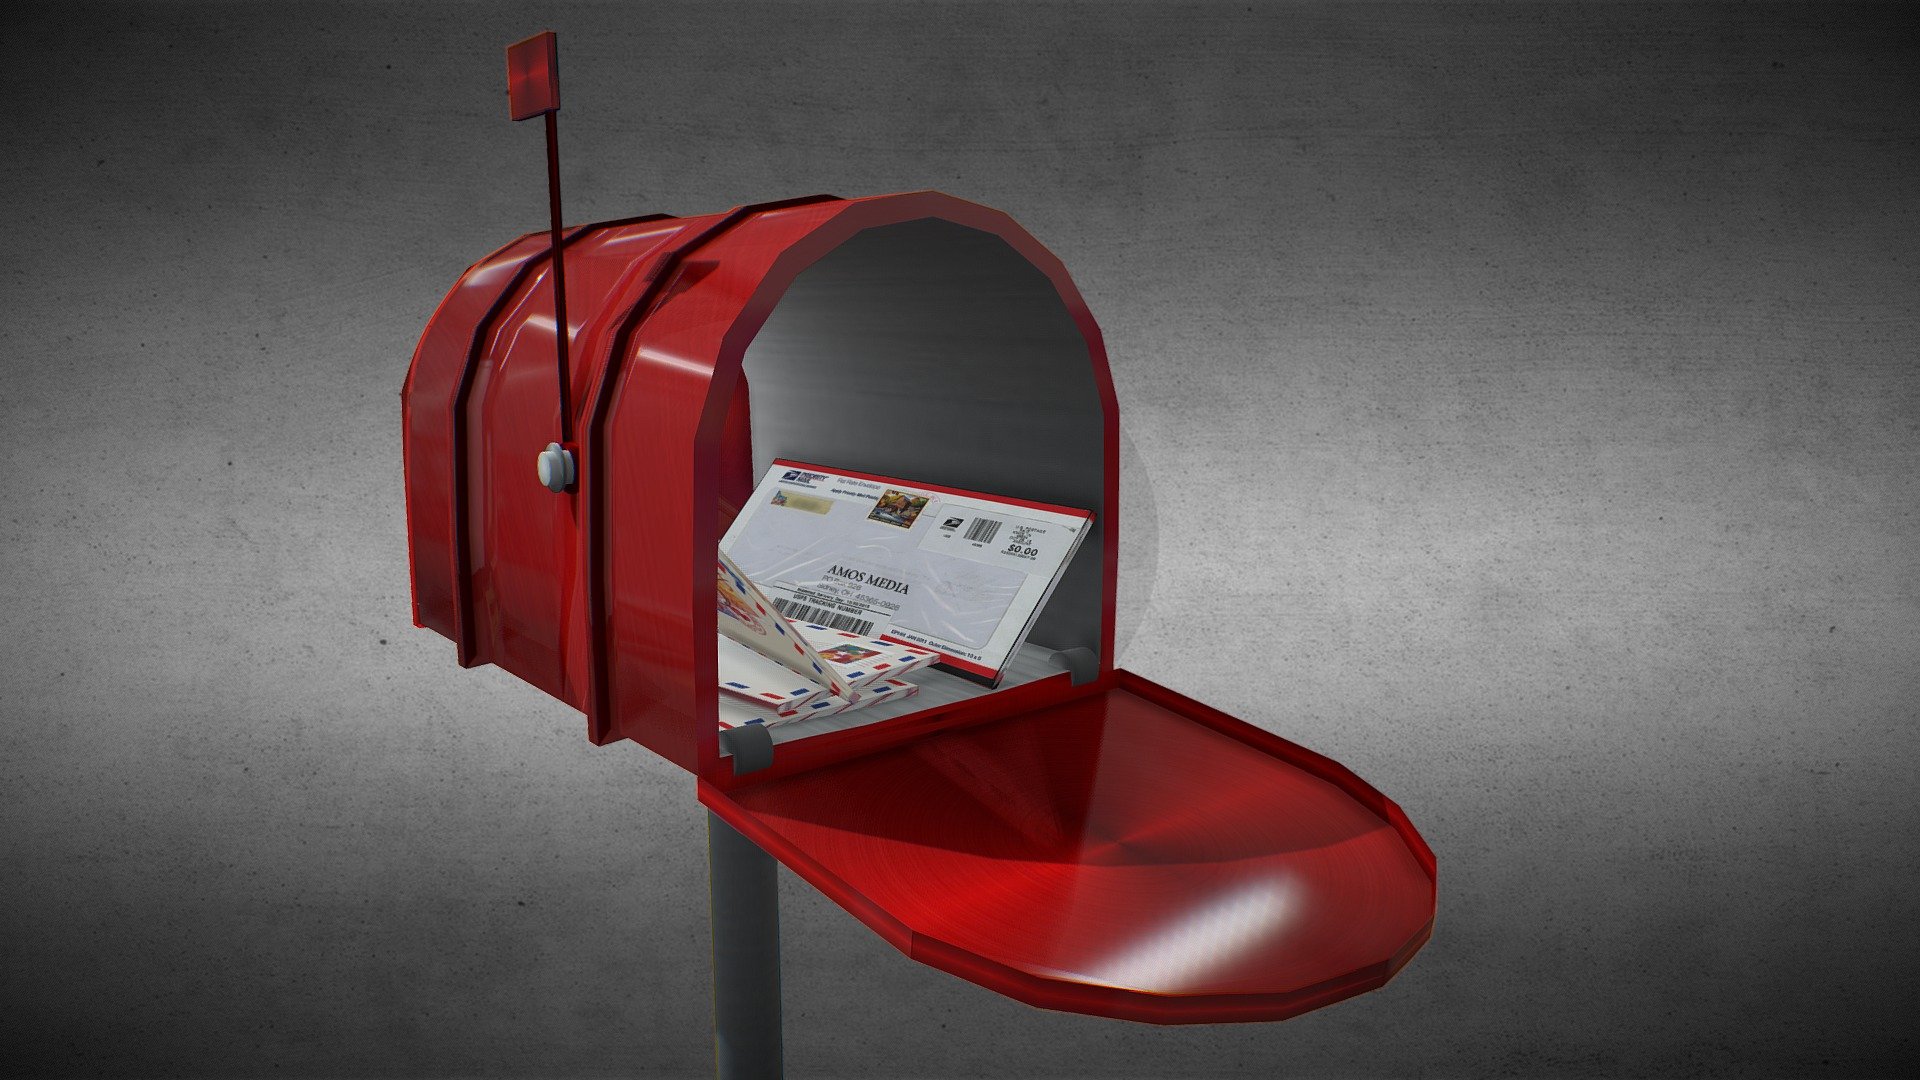 Postbox download the last version for iphone